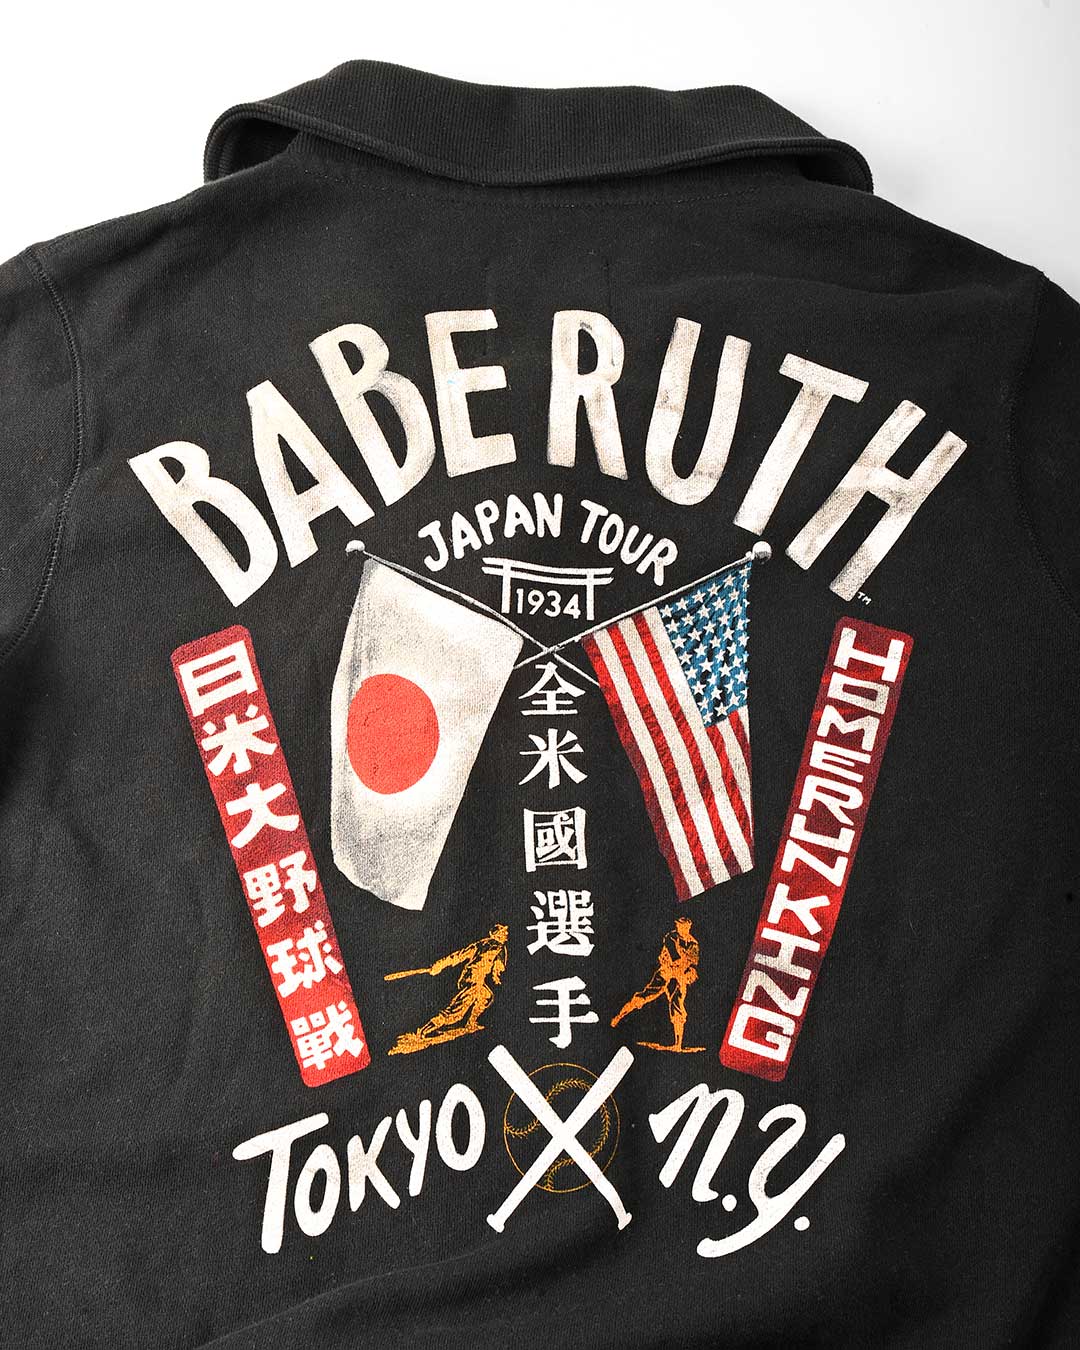 Babe Ruth Black Cardigan - Roots of Fight